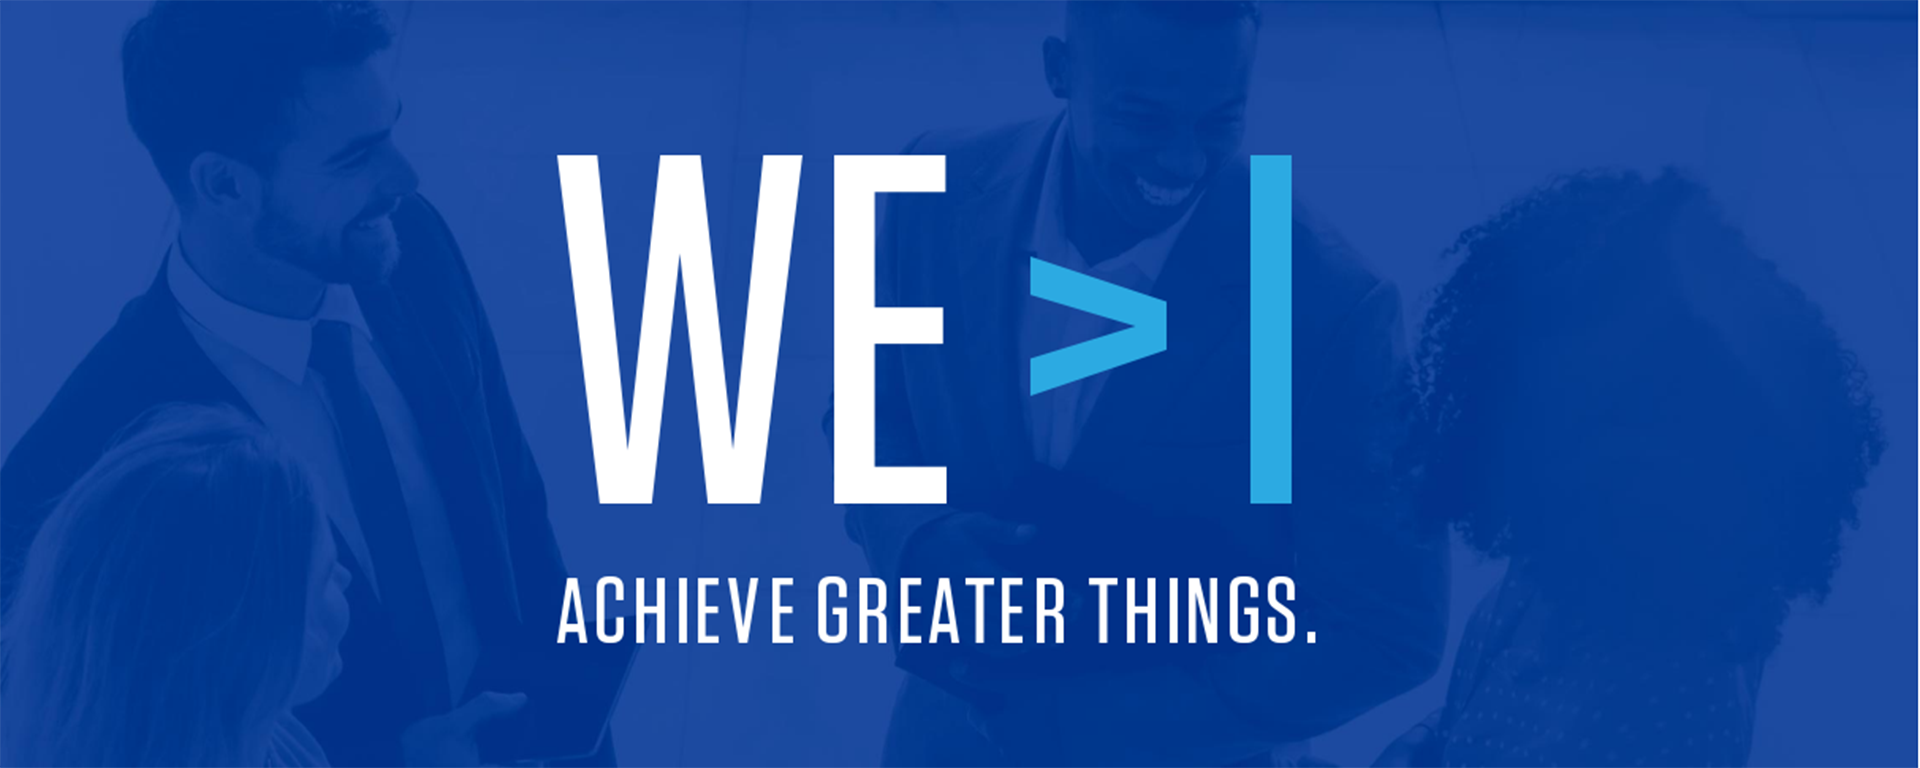 We > I - Achieve Greater Things: bairdcareers.com